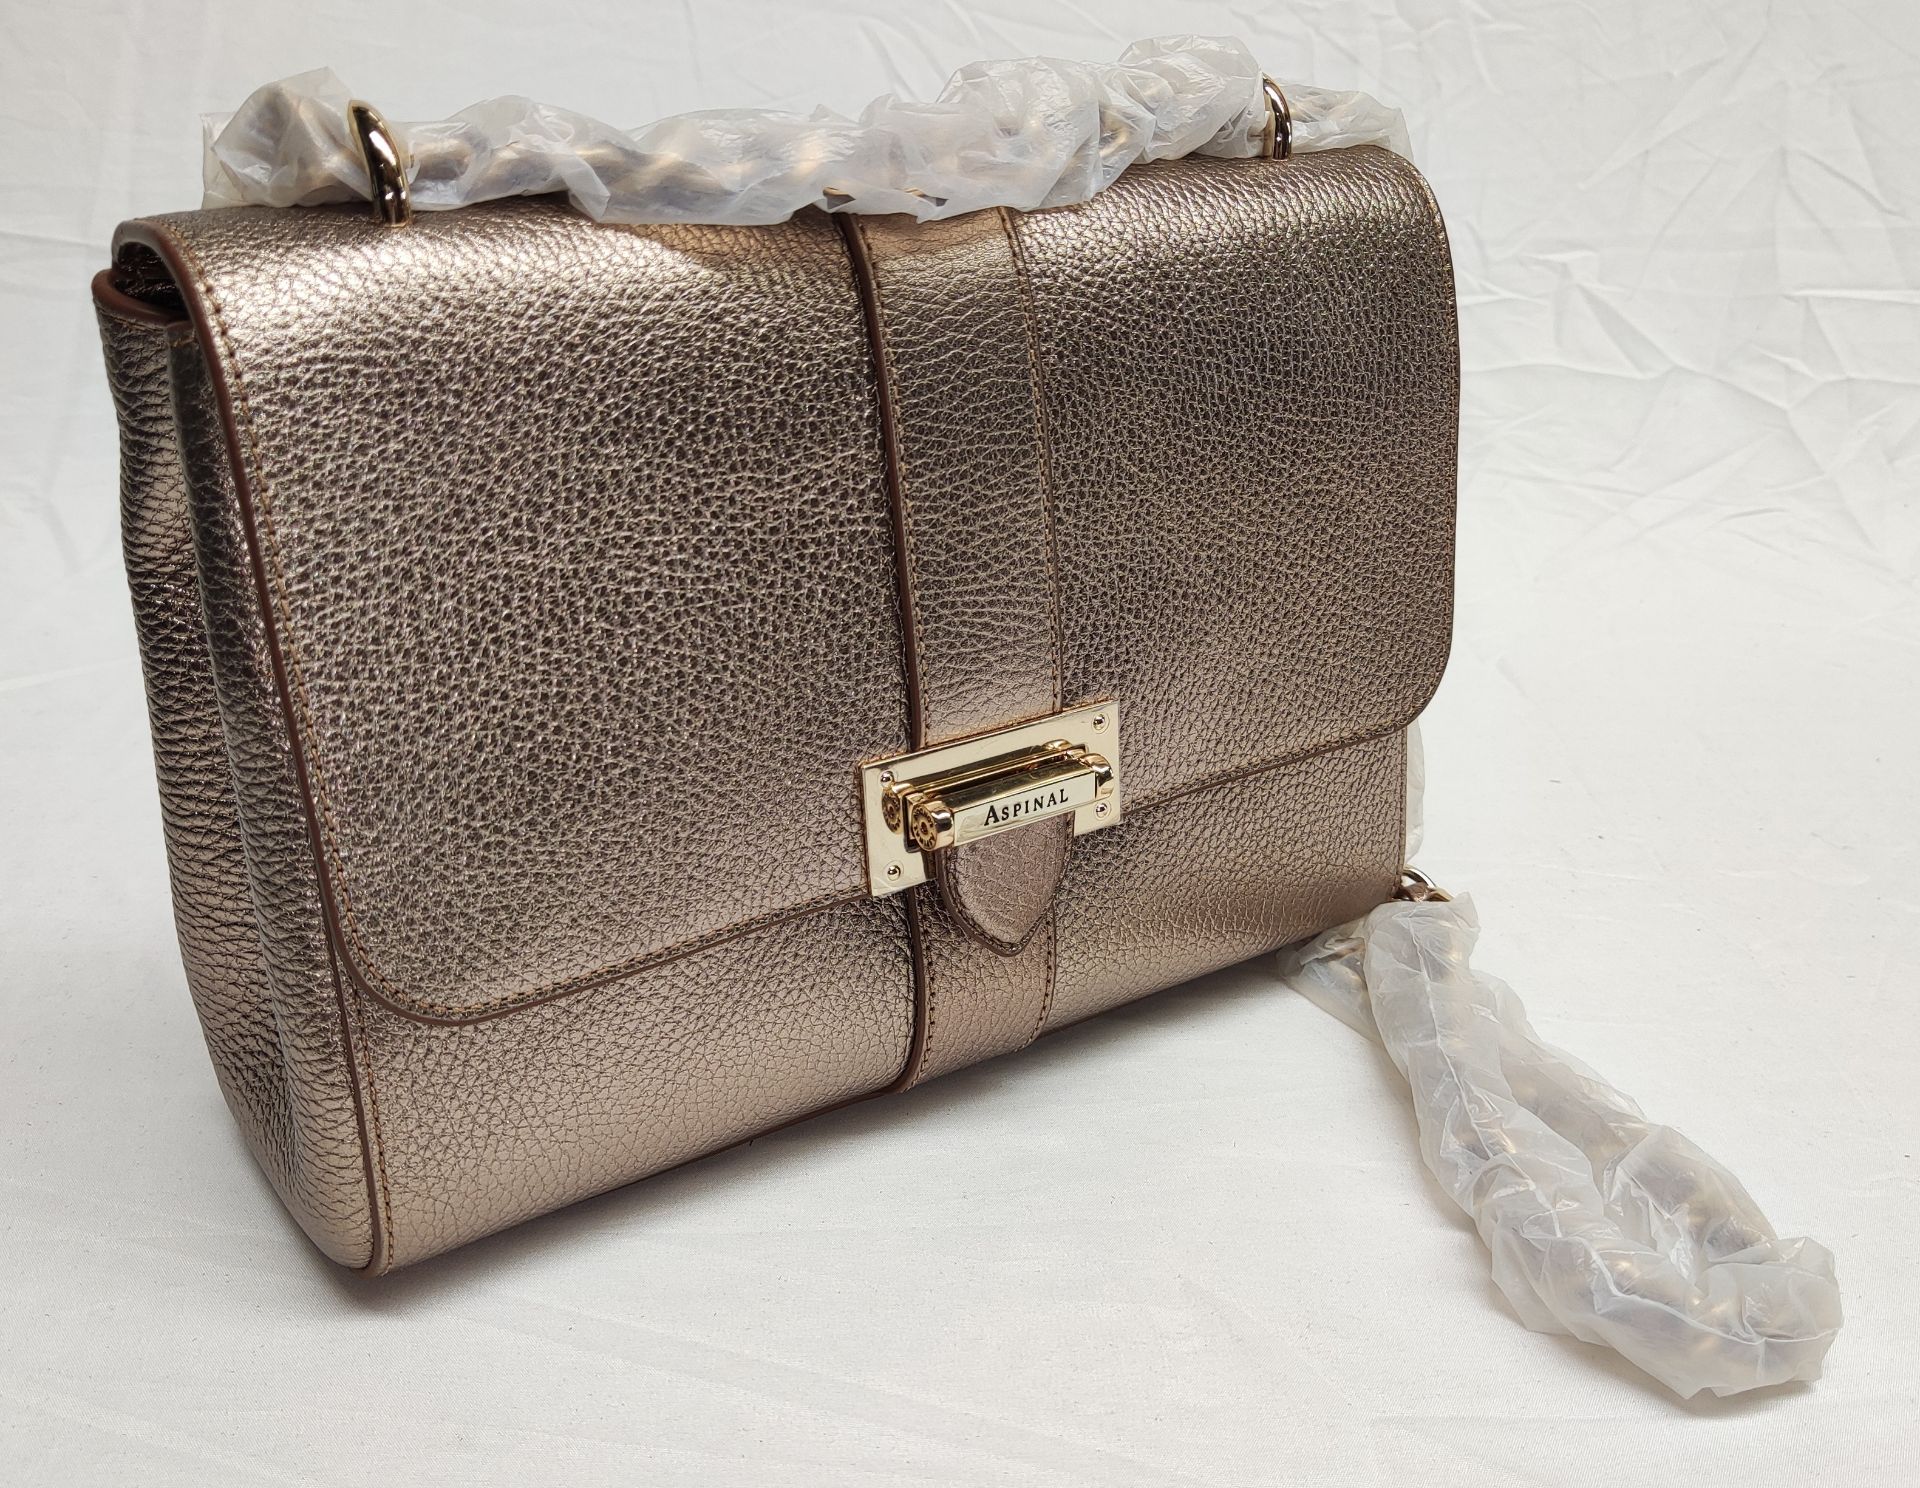 1 x ASPINAL OF LONDON Lottie Small Leather Shoulder Bag In Champagne - New/Boxed - Original RRP £550 - Image 2 of 19